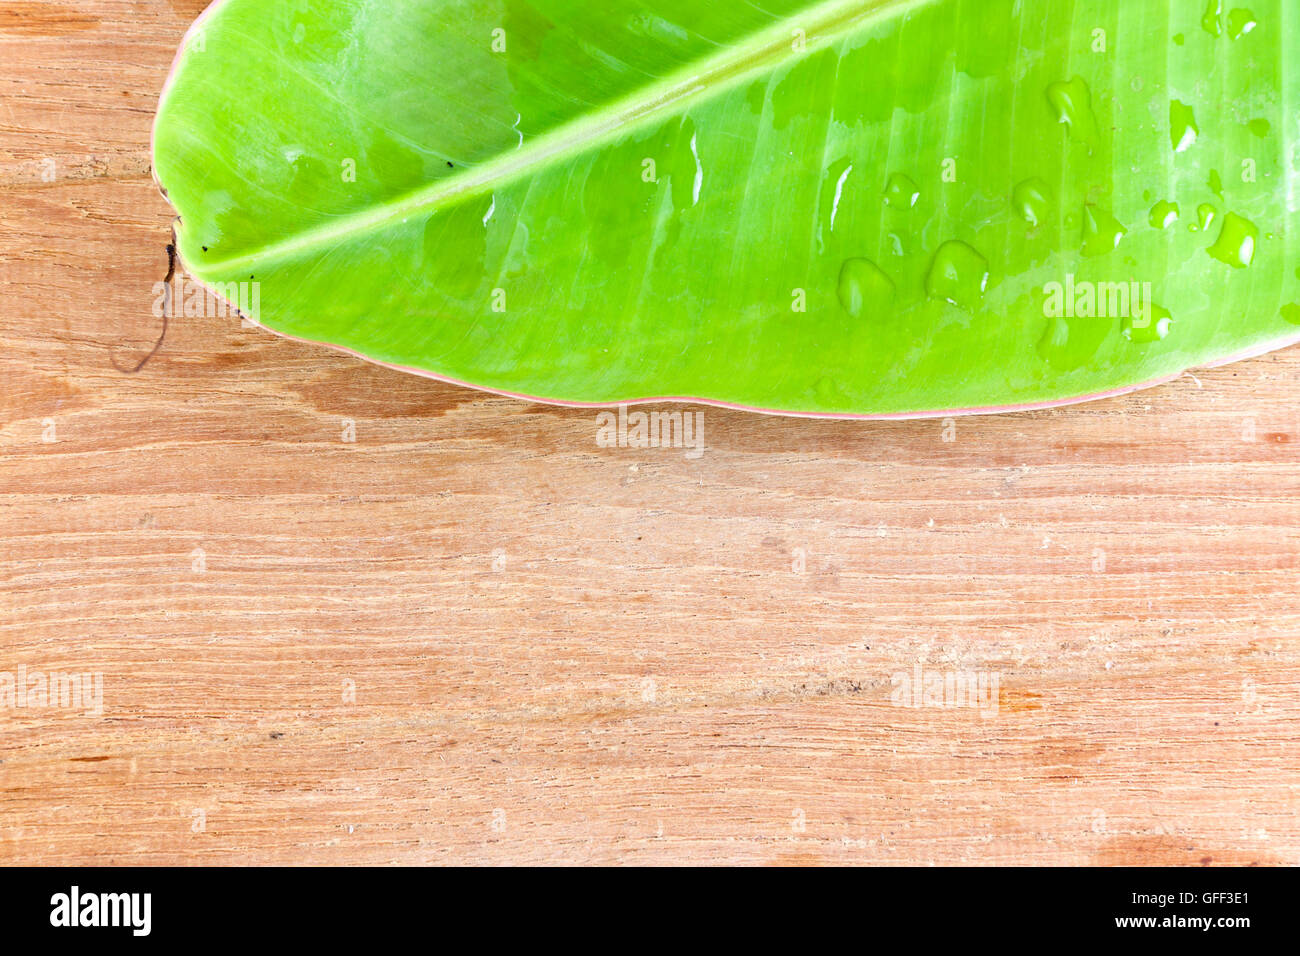 Banana leaf green color fresh on wooden background Stock Photo